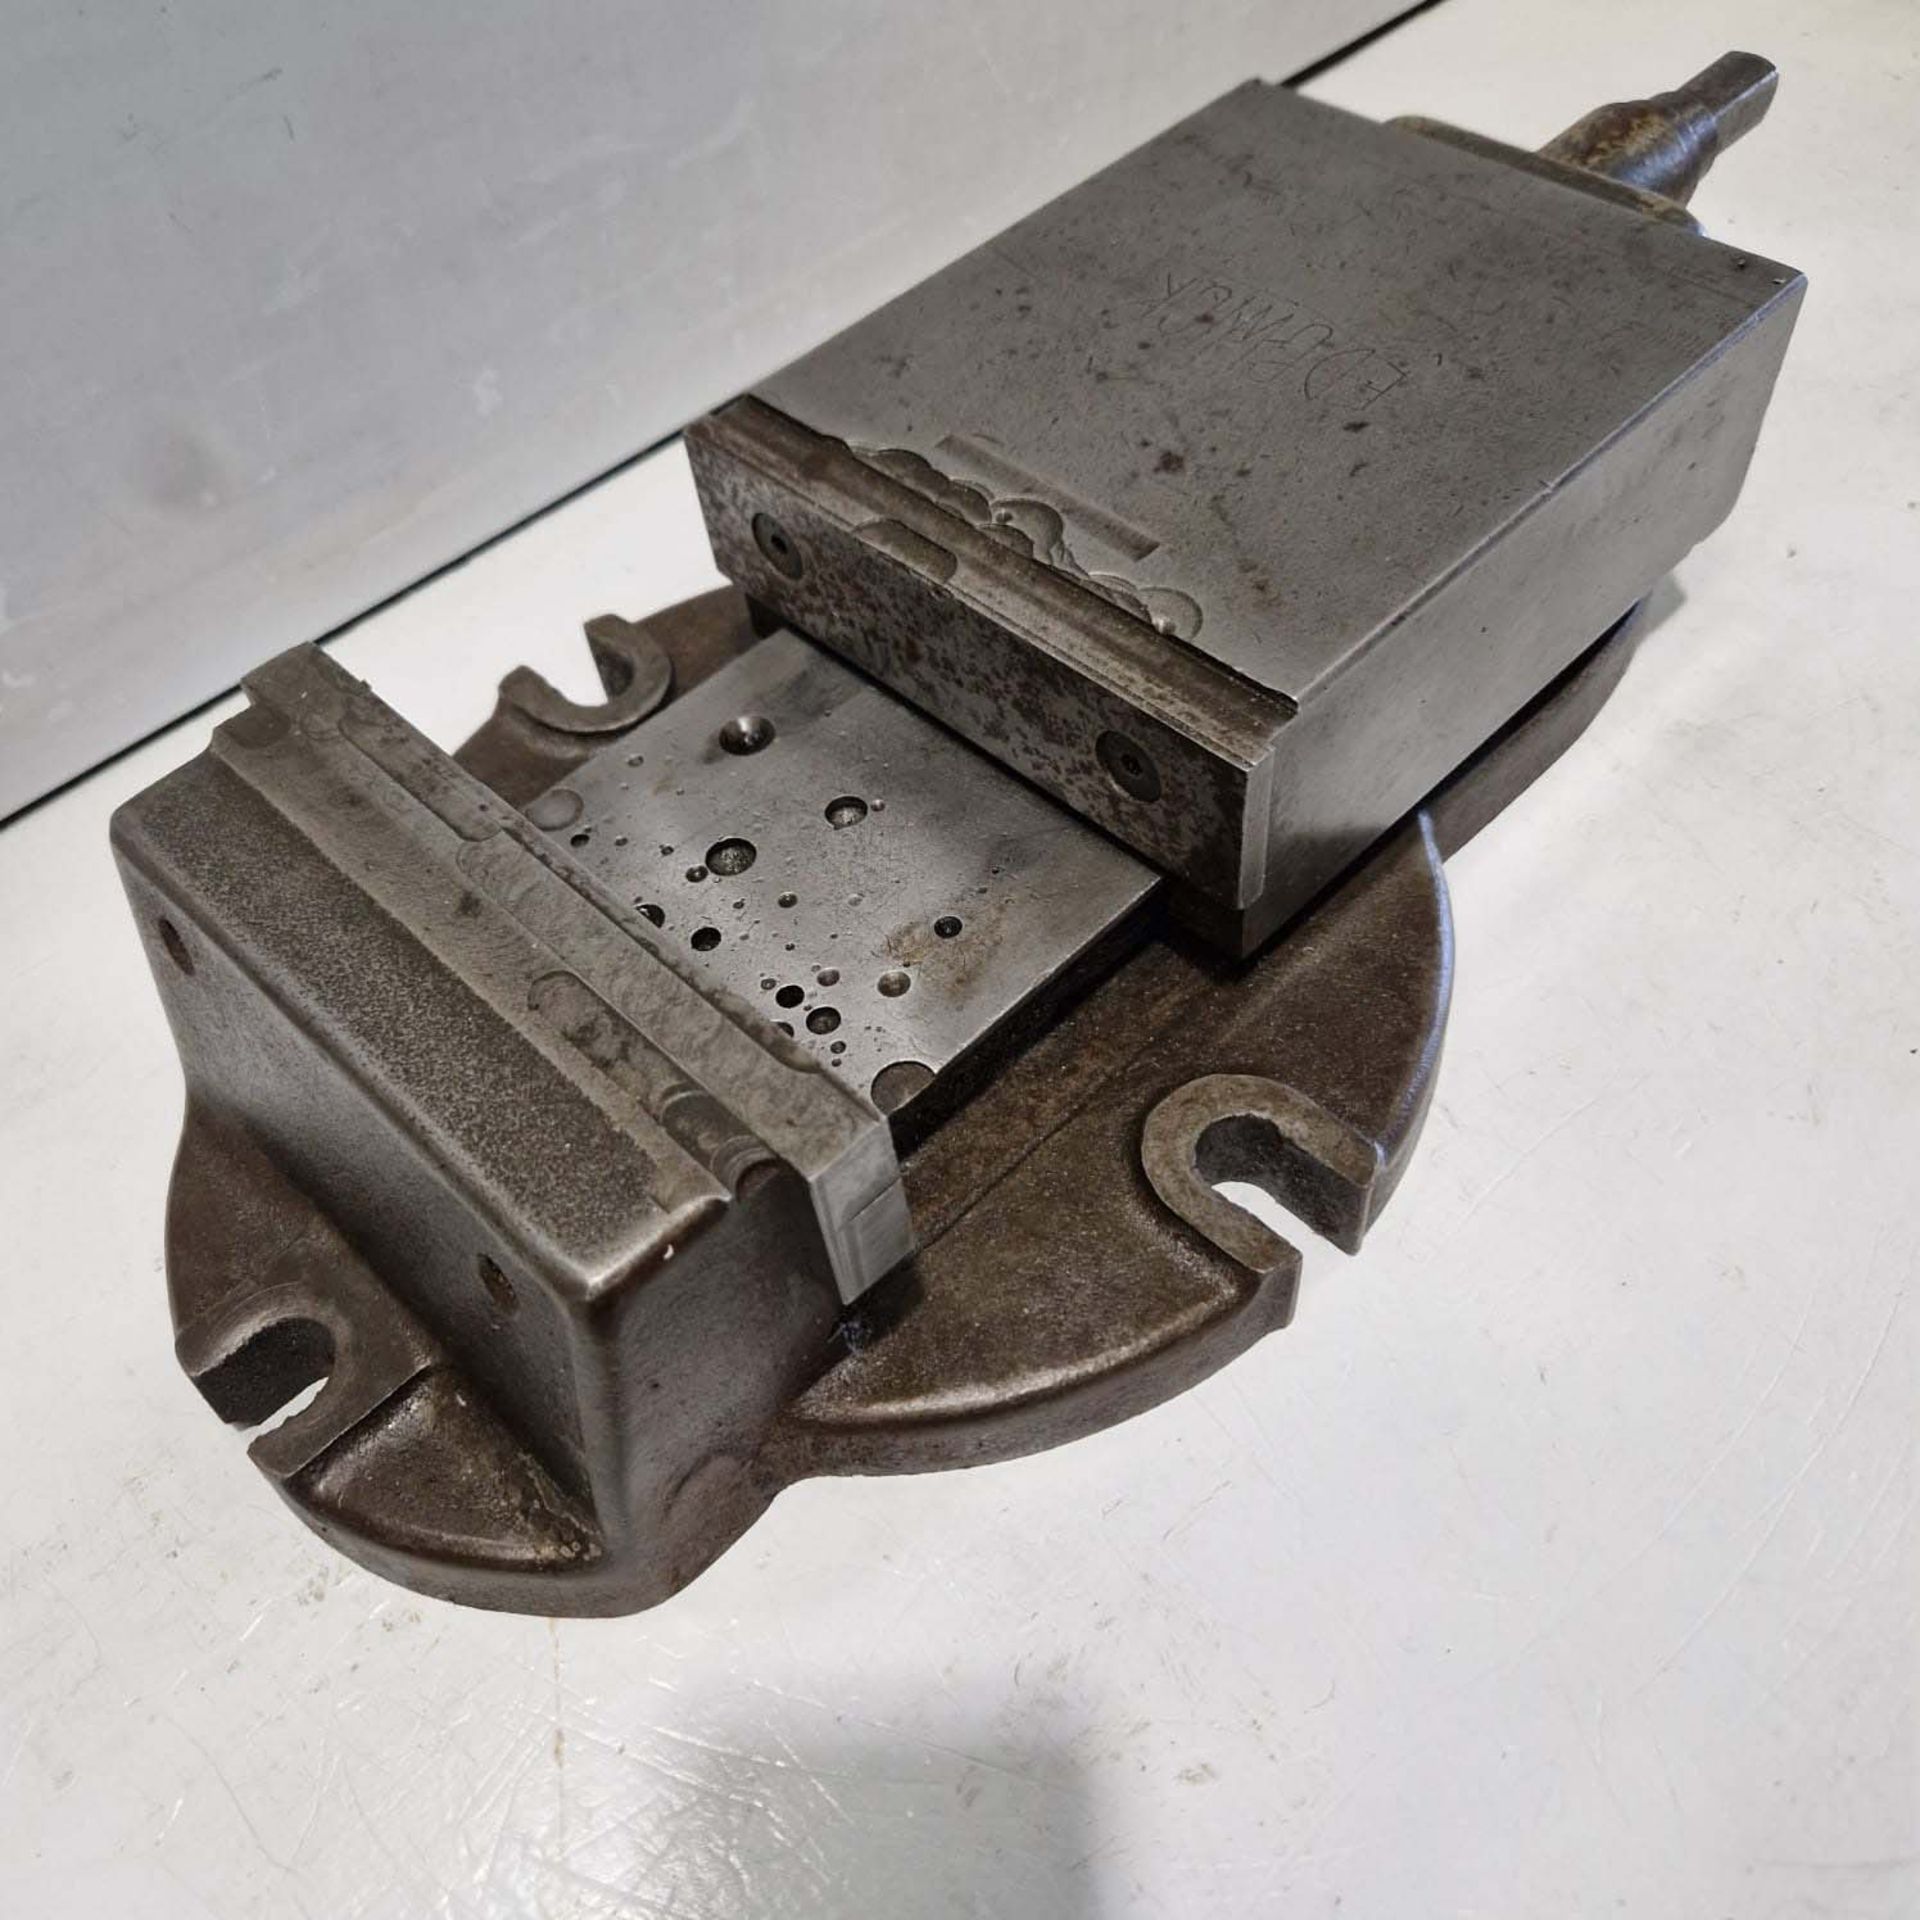 Edgwick 6" Machine Vice. Width of Jaws 6 1/2". Height of Jaws 1 1/2". Max Opening of Jaws 4 3/4". - Image 2 of 5